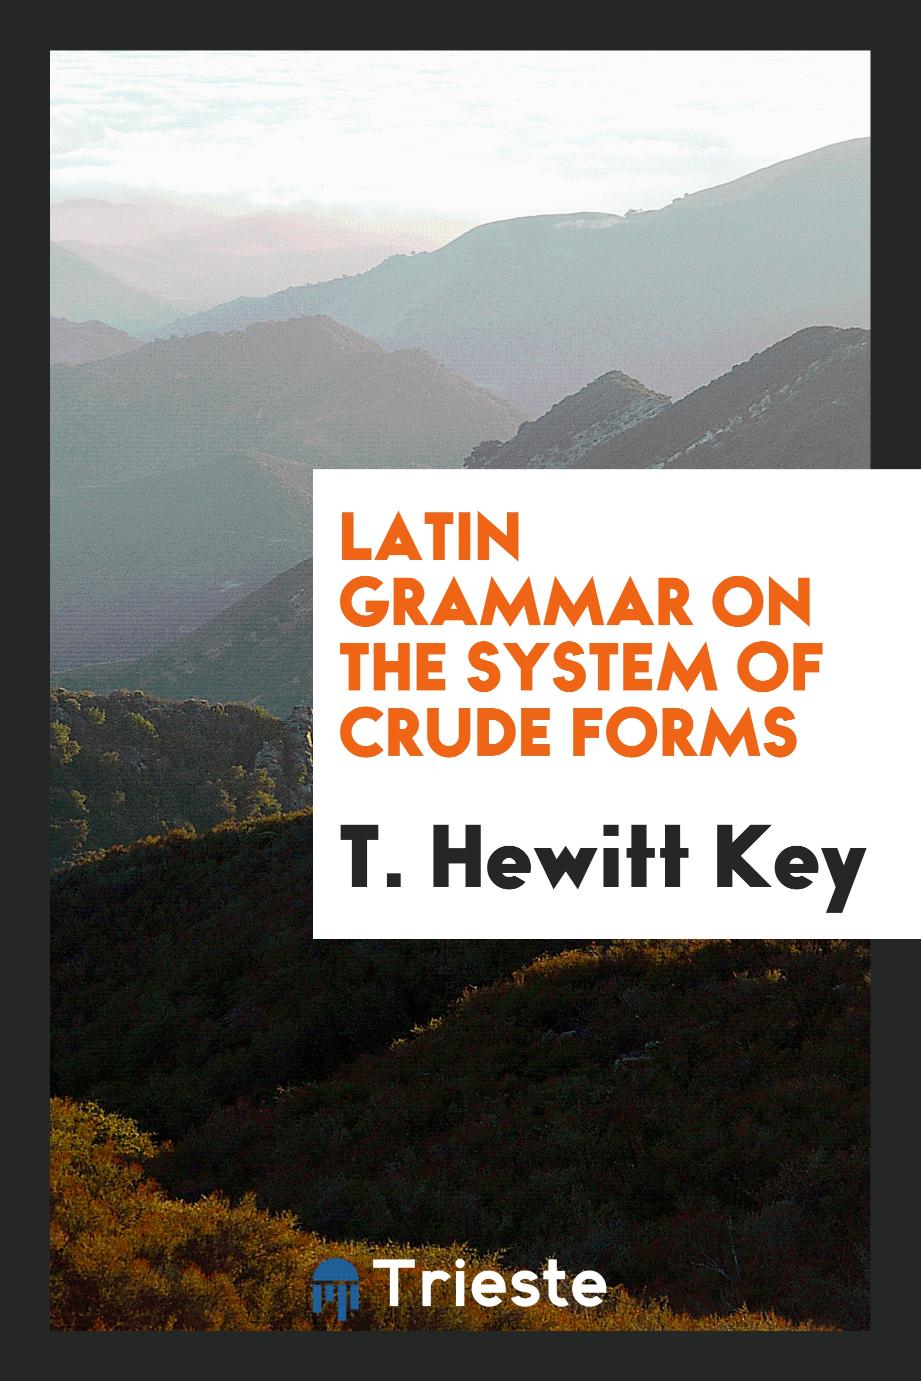 Latin Grammar on the System of Crude Forms